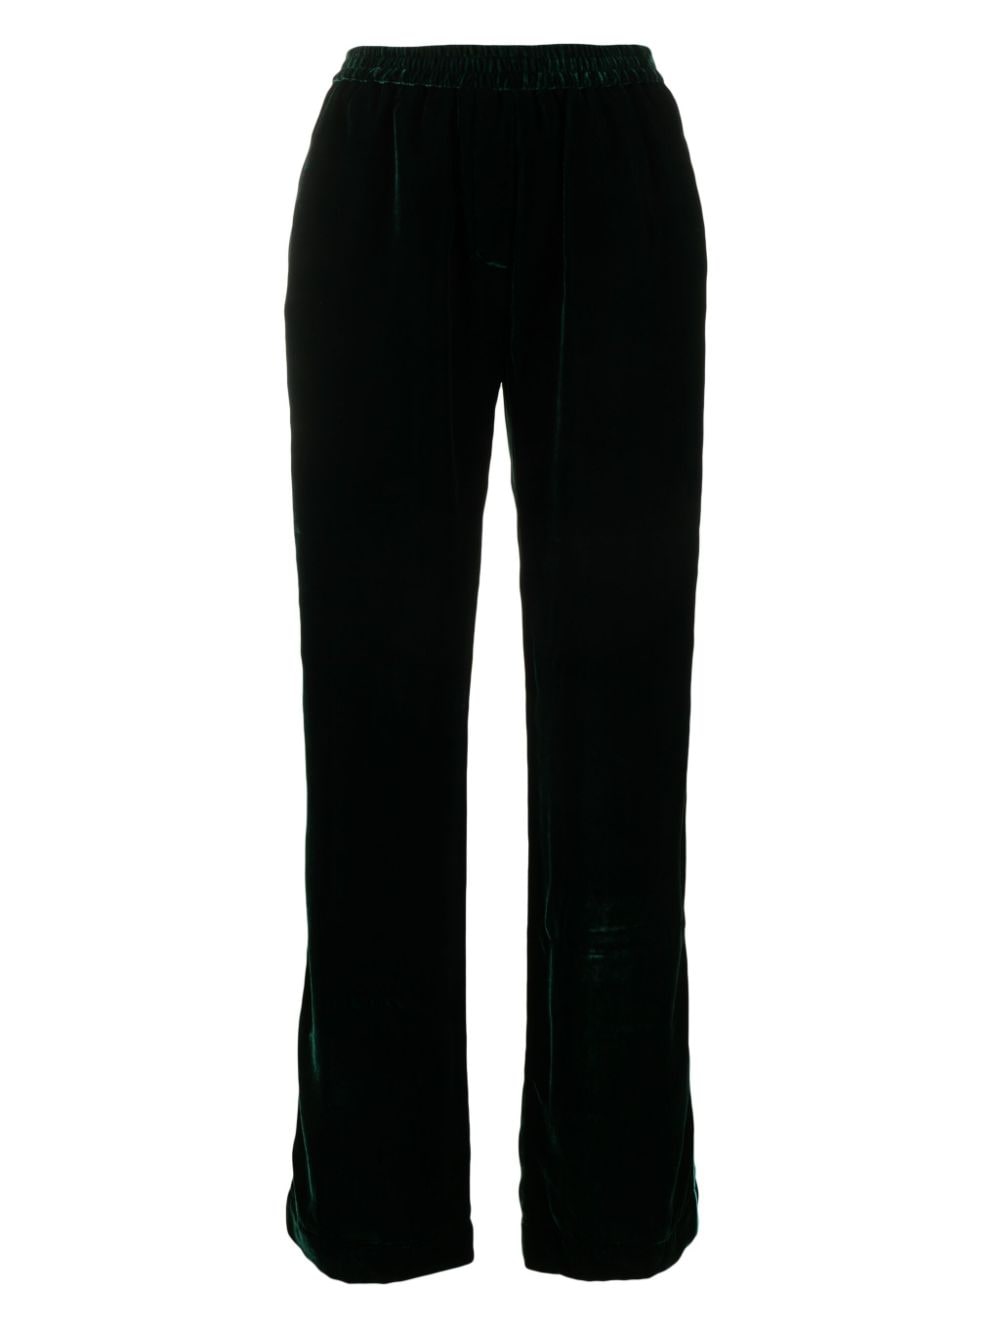 For restless sleepers FOR RESTLESS SLEEPERS- Velvet Trousers